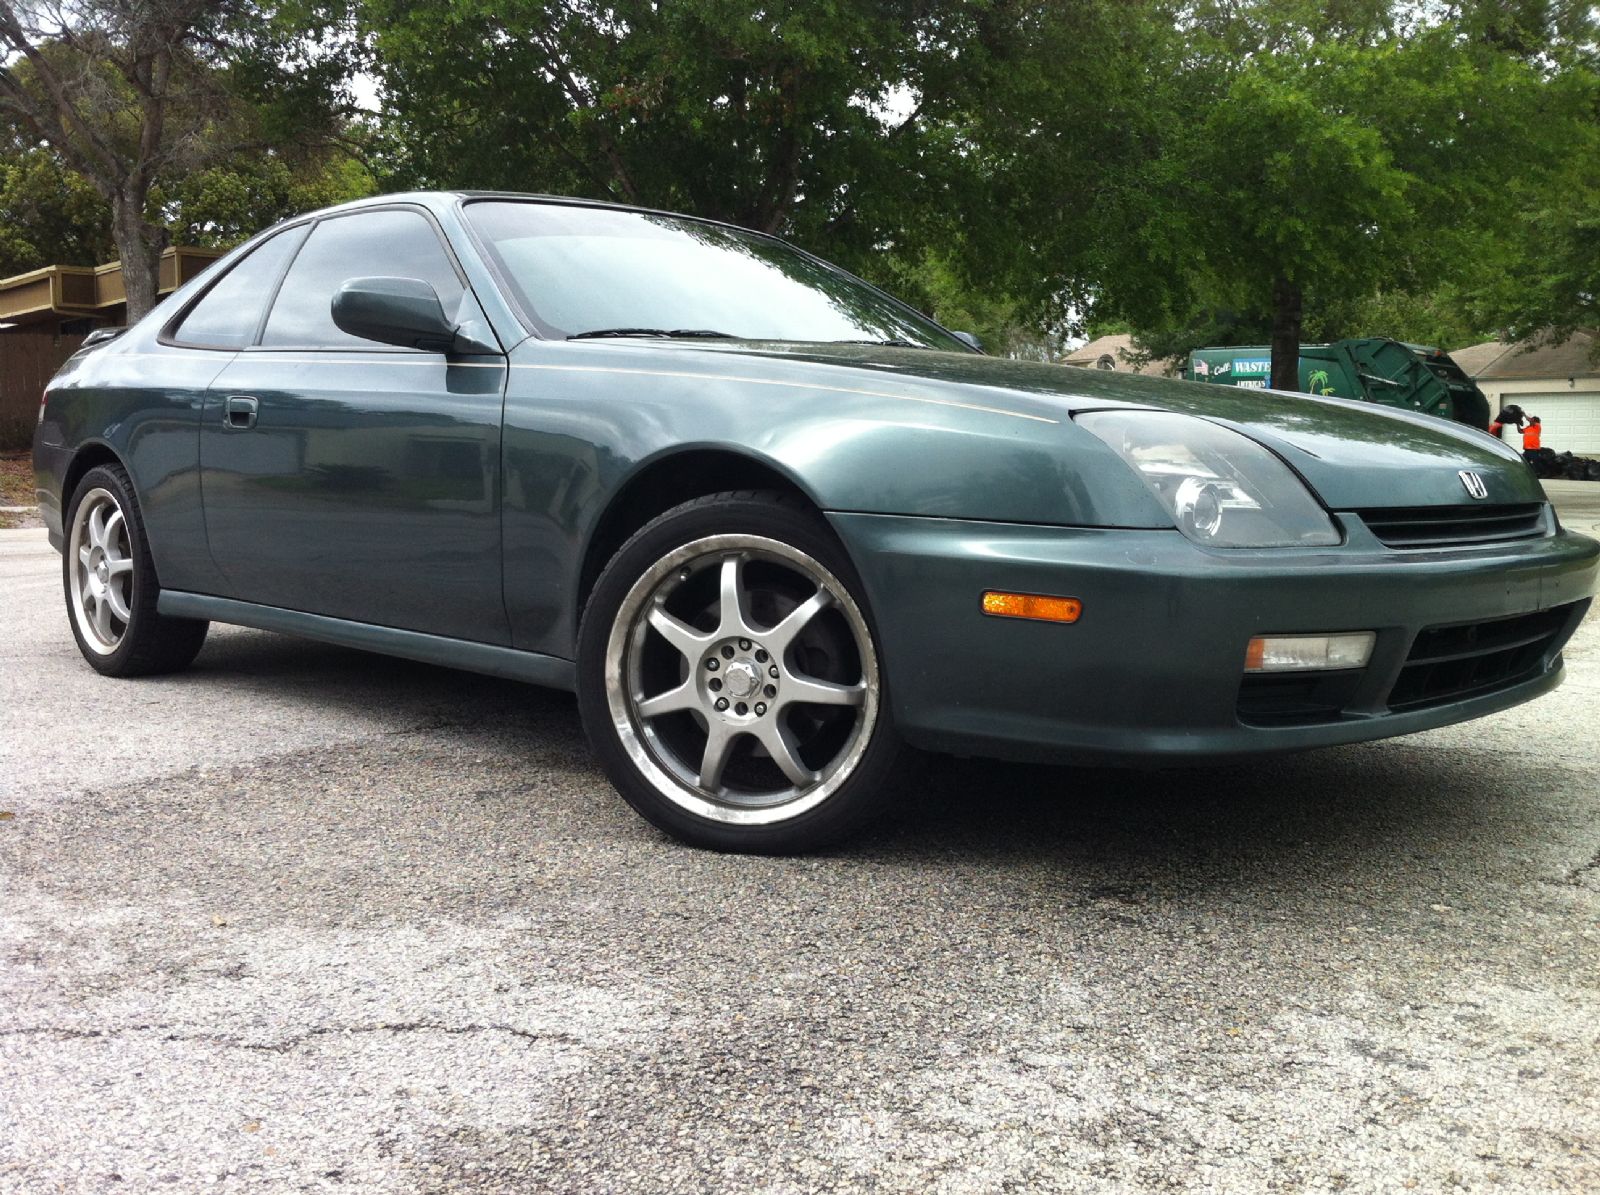 Supercharged Prelude